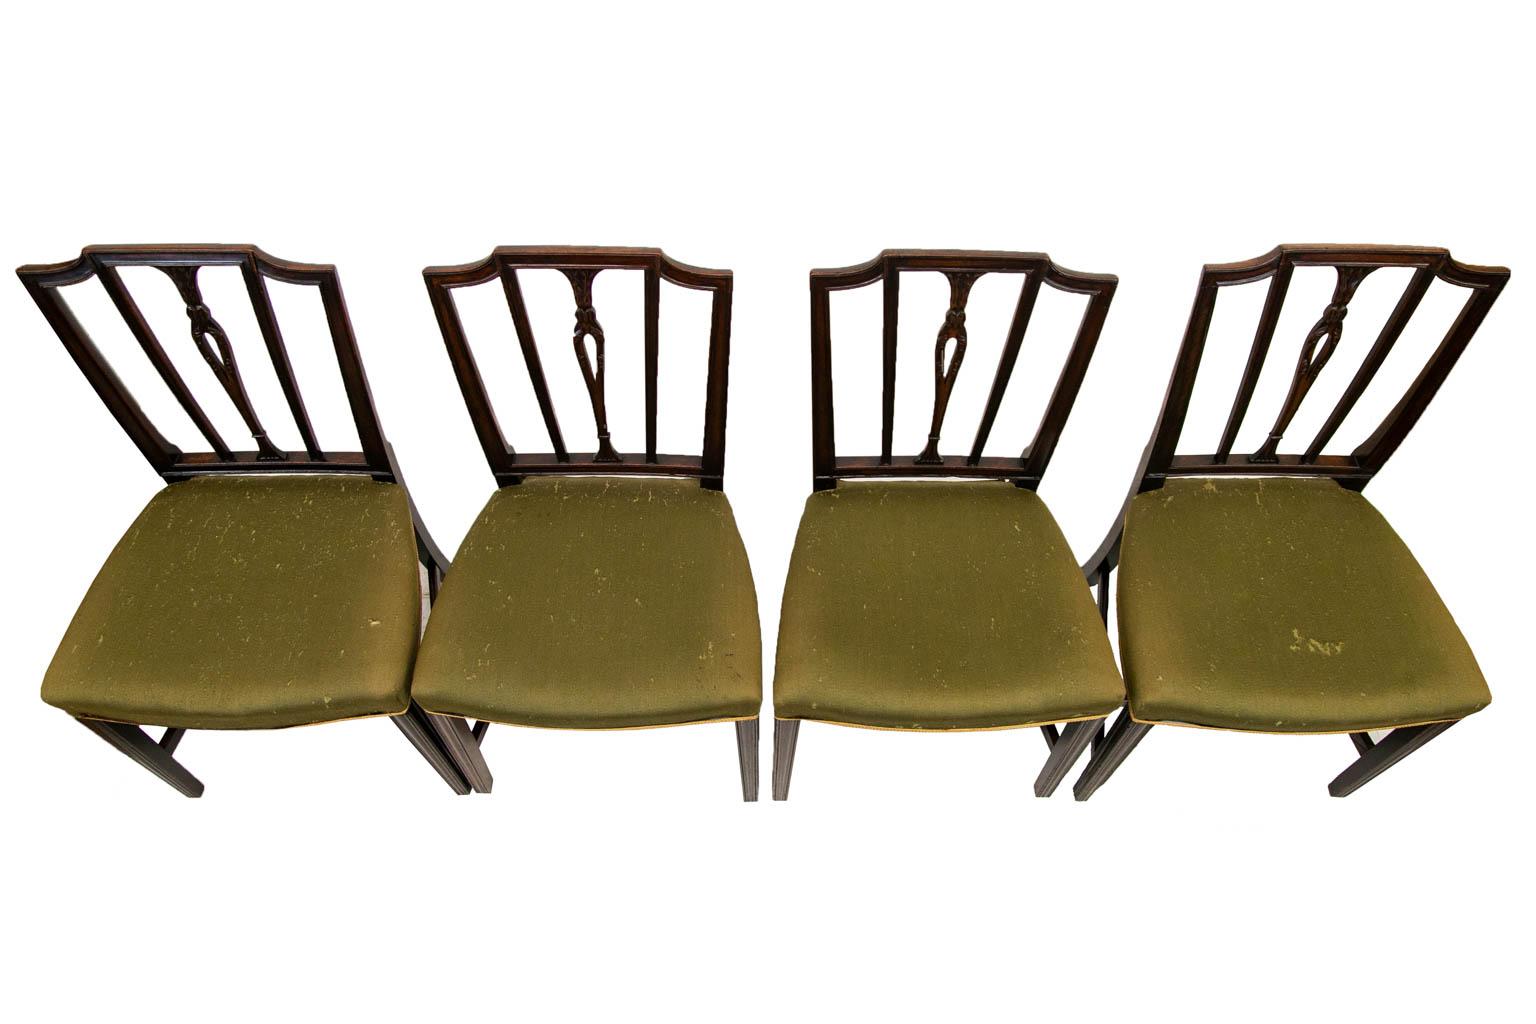 The back splat of this set of mahogany chairs has a pierced center splat carved with leaves and framed by four molded upright stiles. The legs have carved moldings and are joined by an 